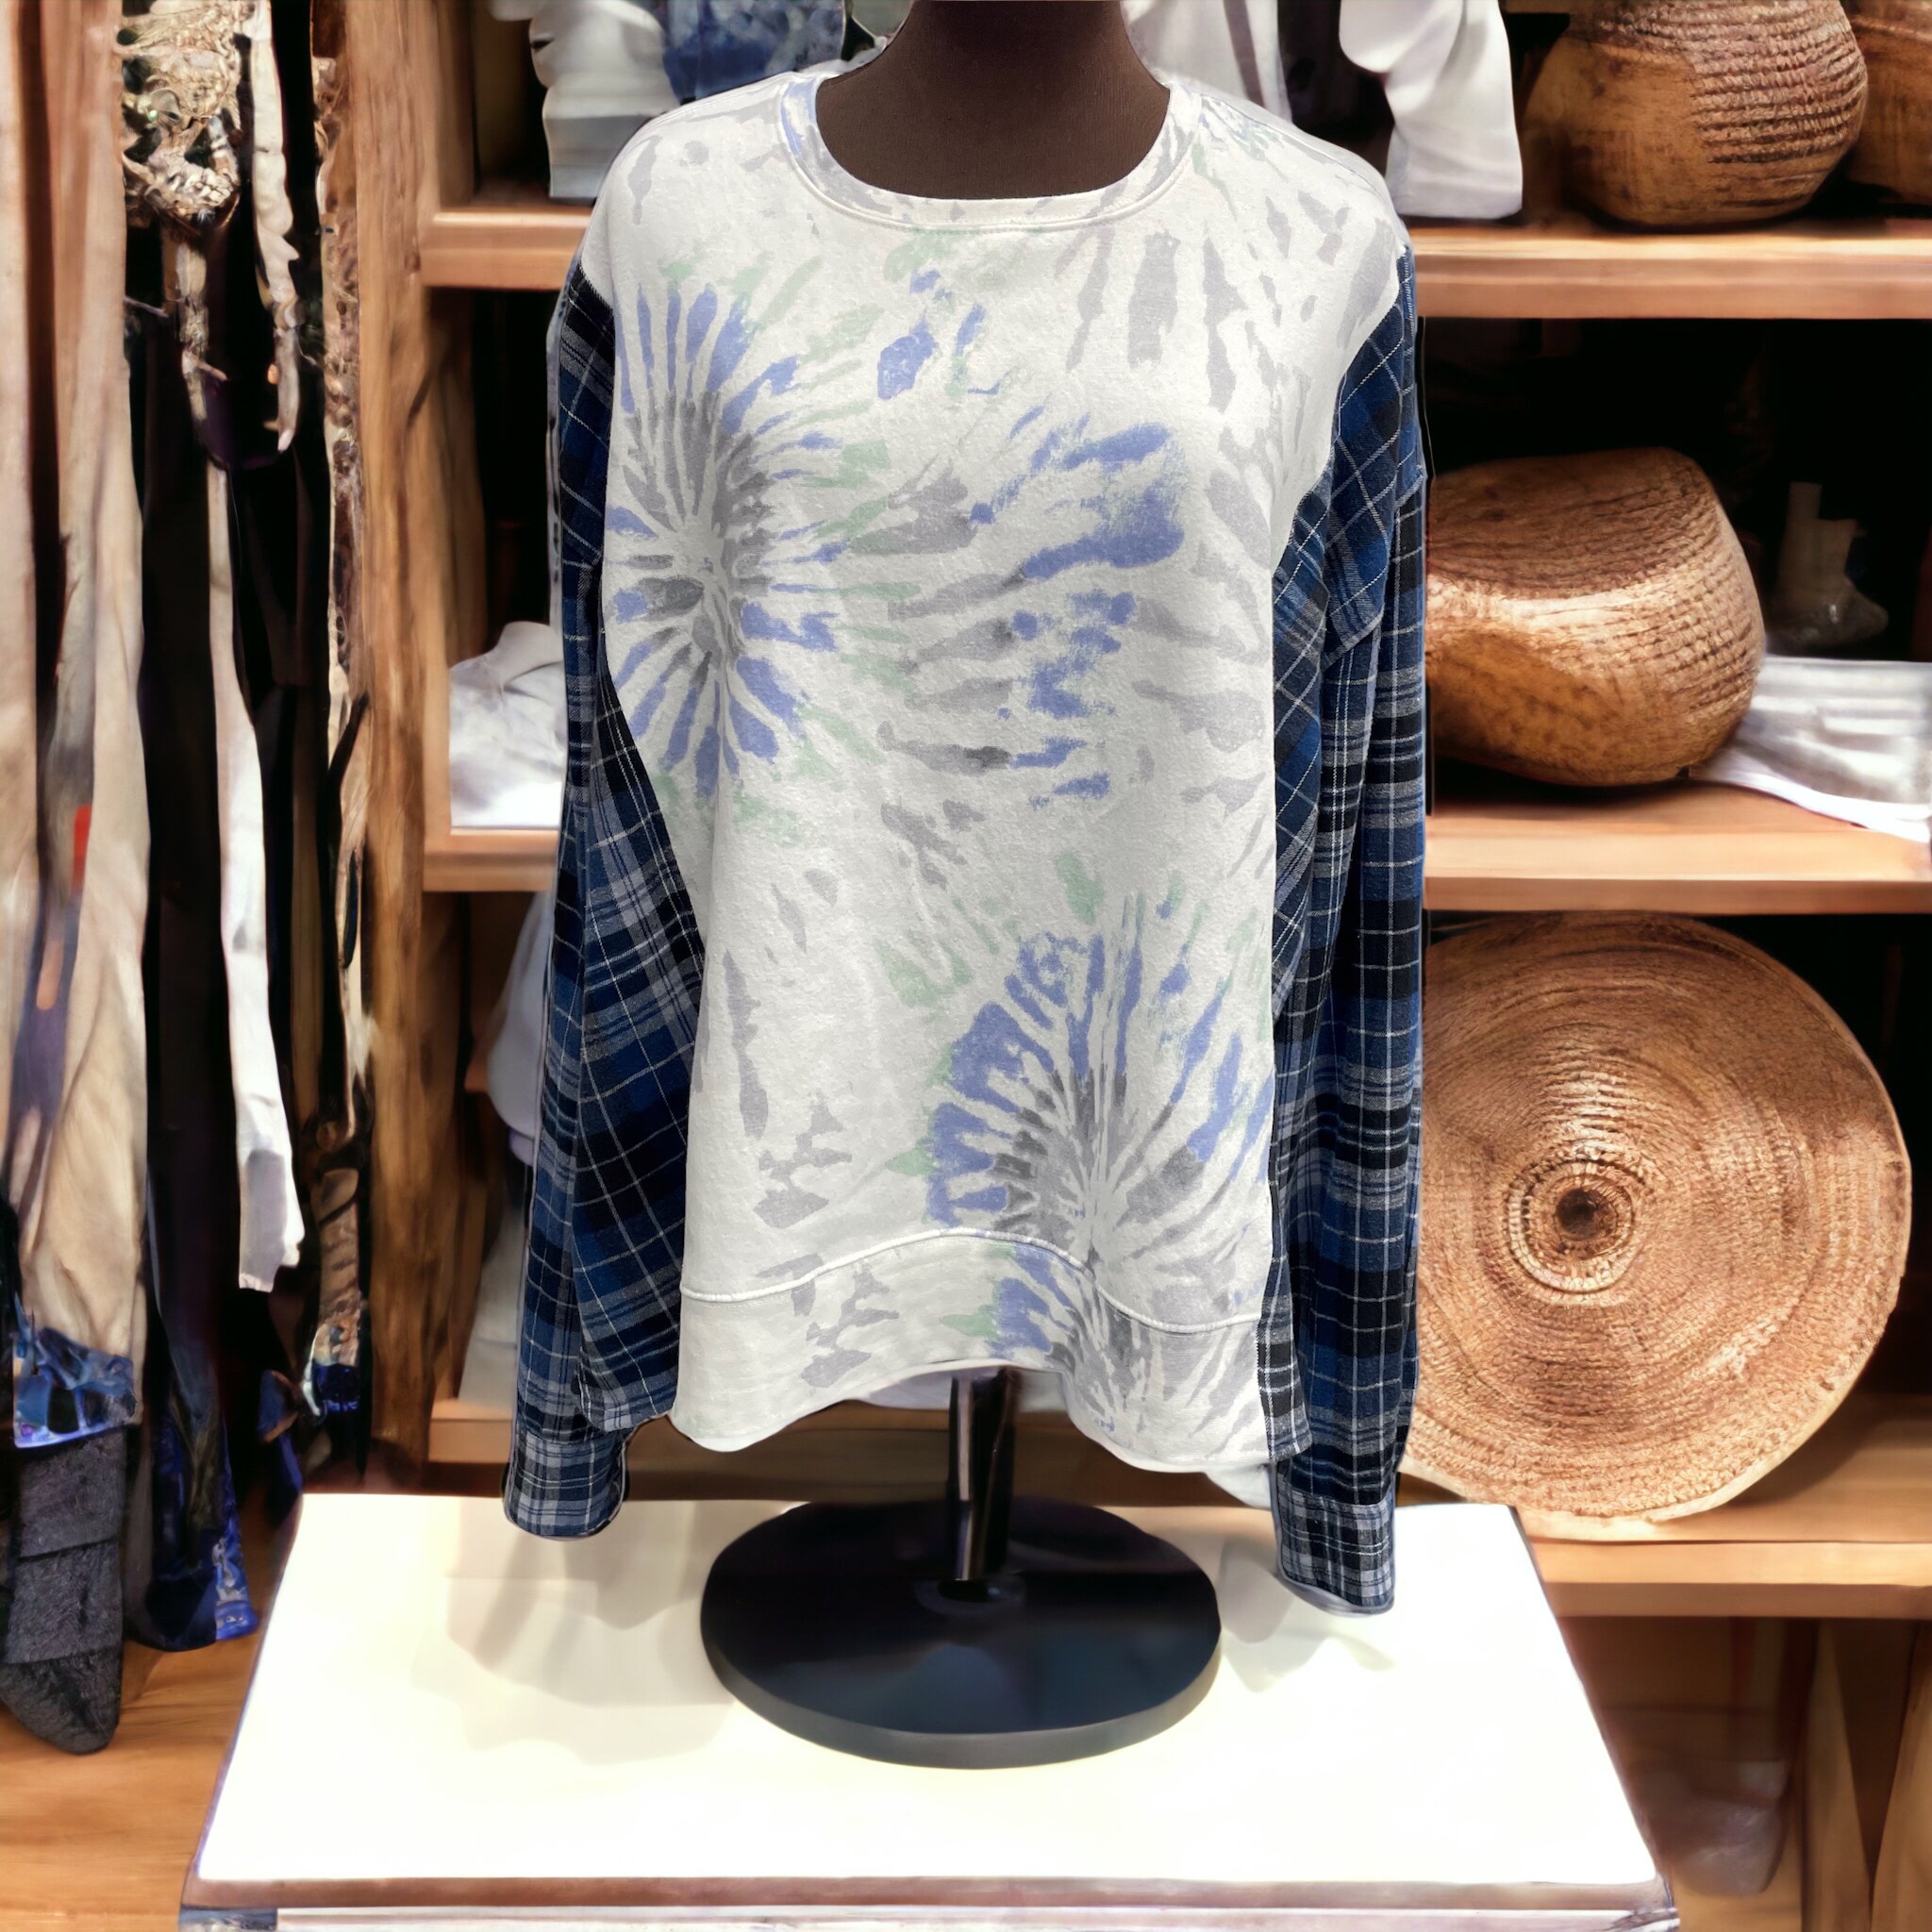 A mannequin displaying a tie dye shirt.